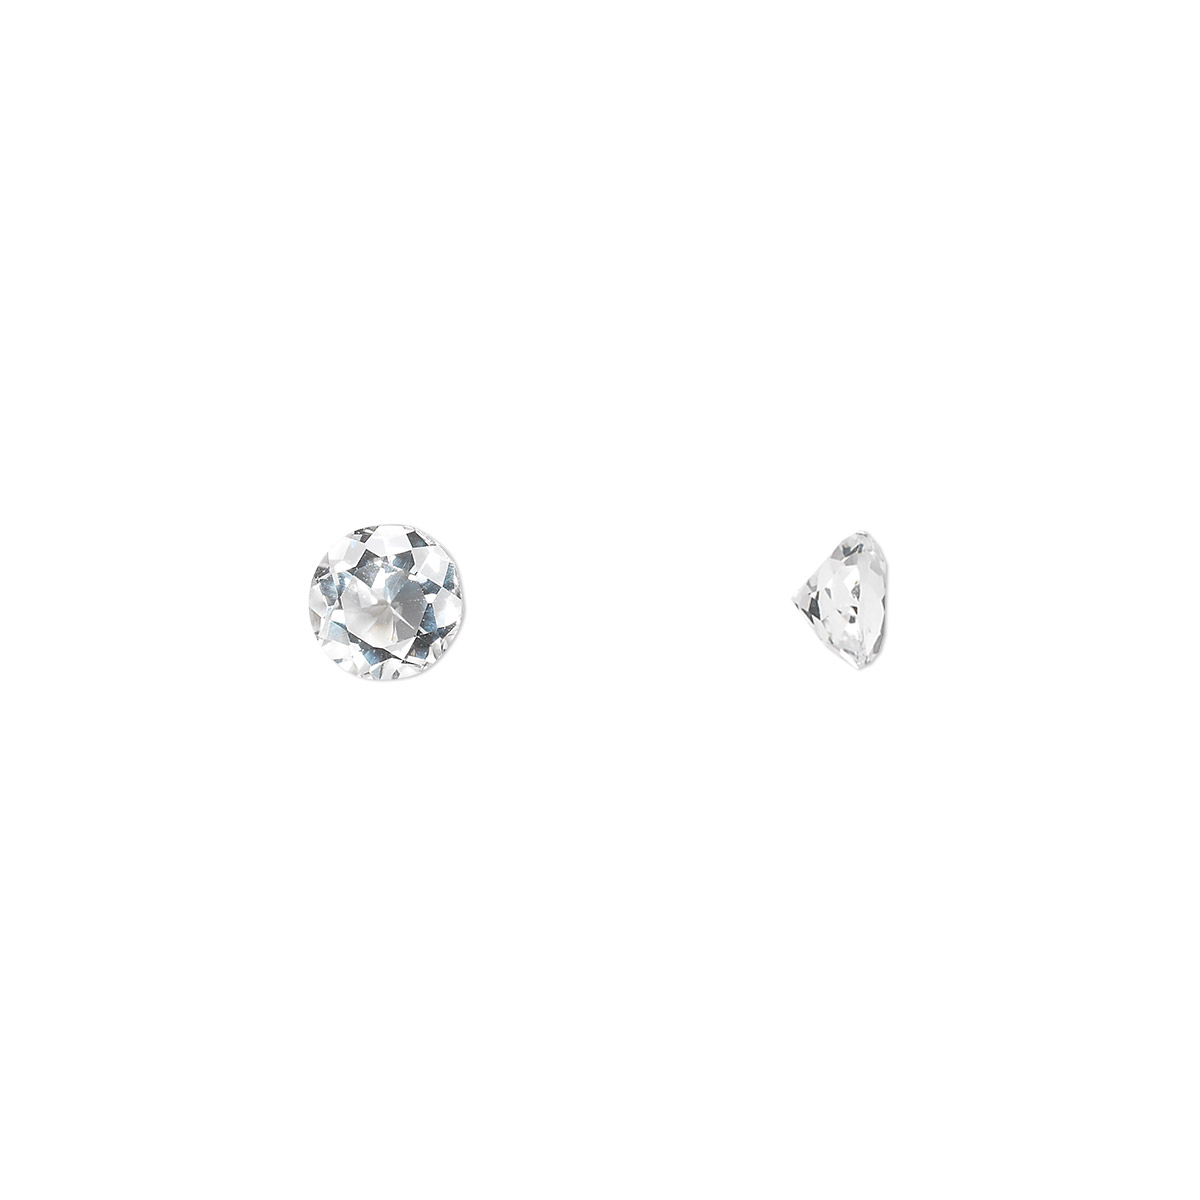 Gem, white topaz (natural), 5mm faceted round, A grade, Mohs hardness 8 ...